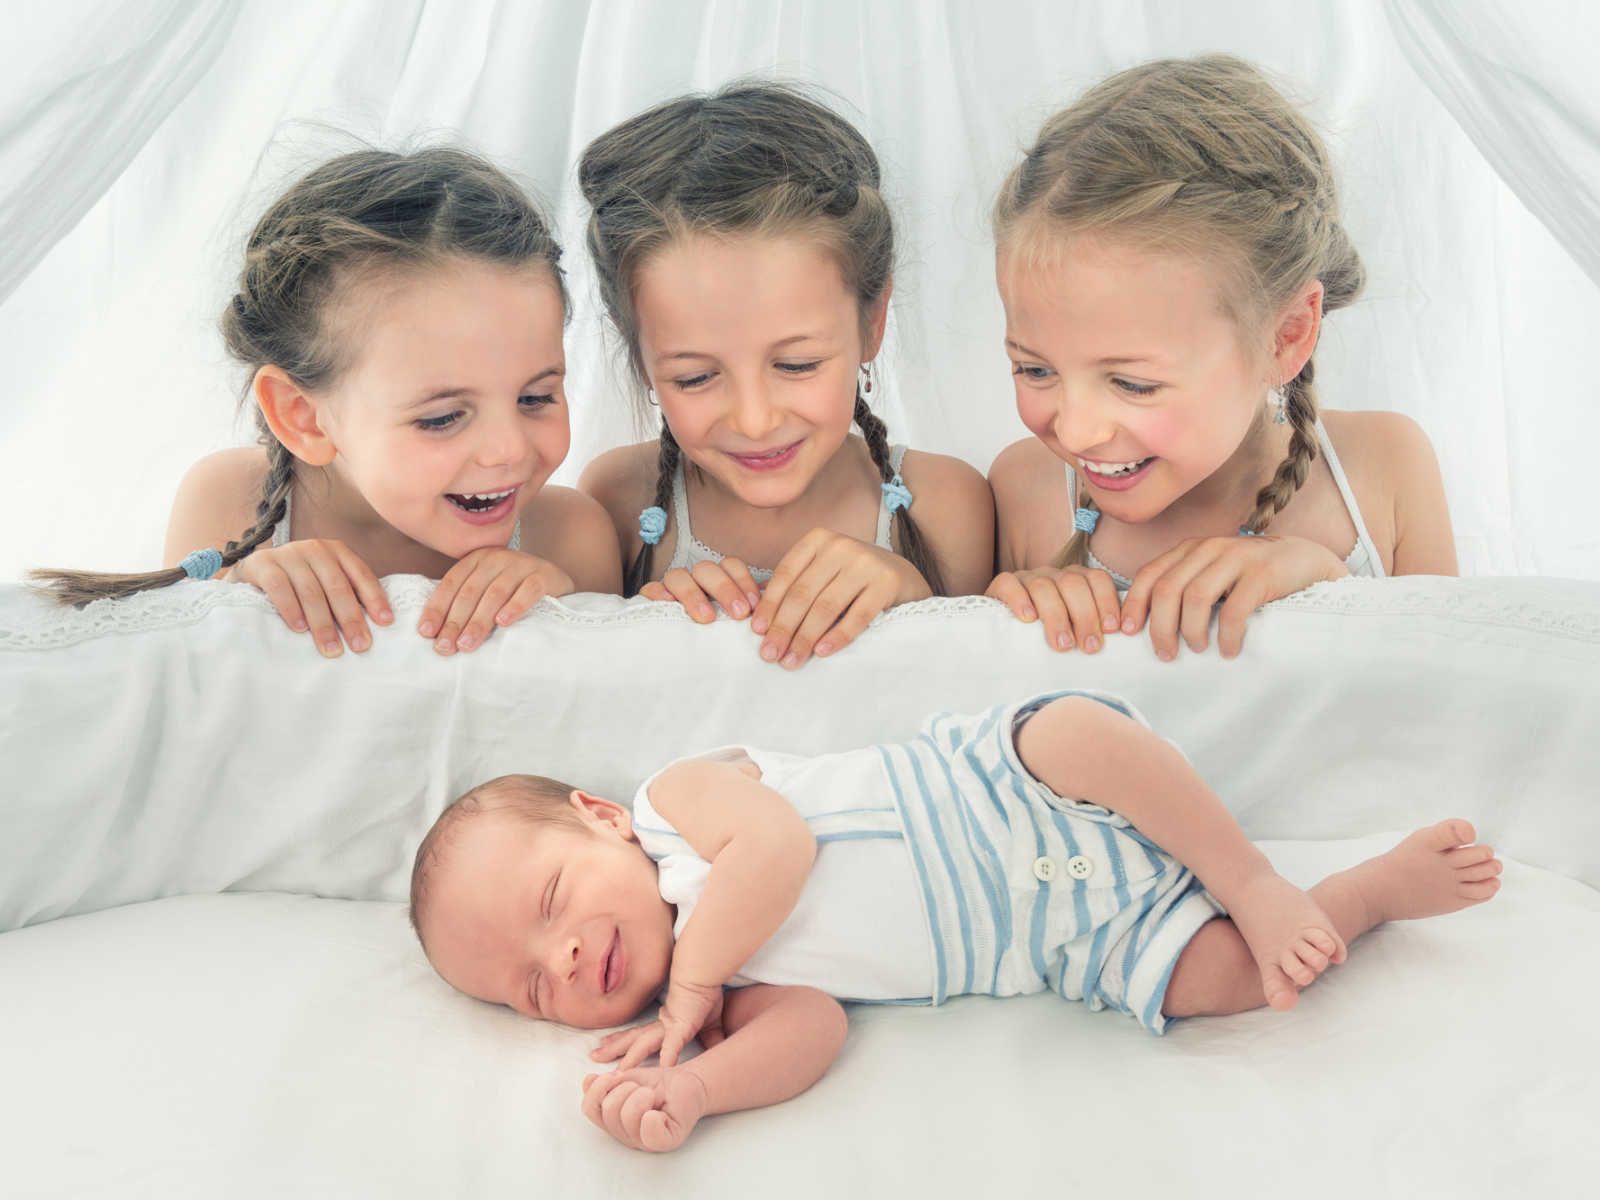 three girls smiling over their newborn sibling who is sleeping in white crib